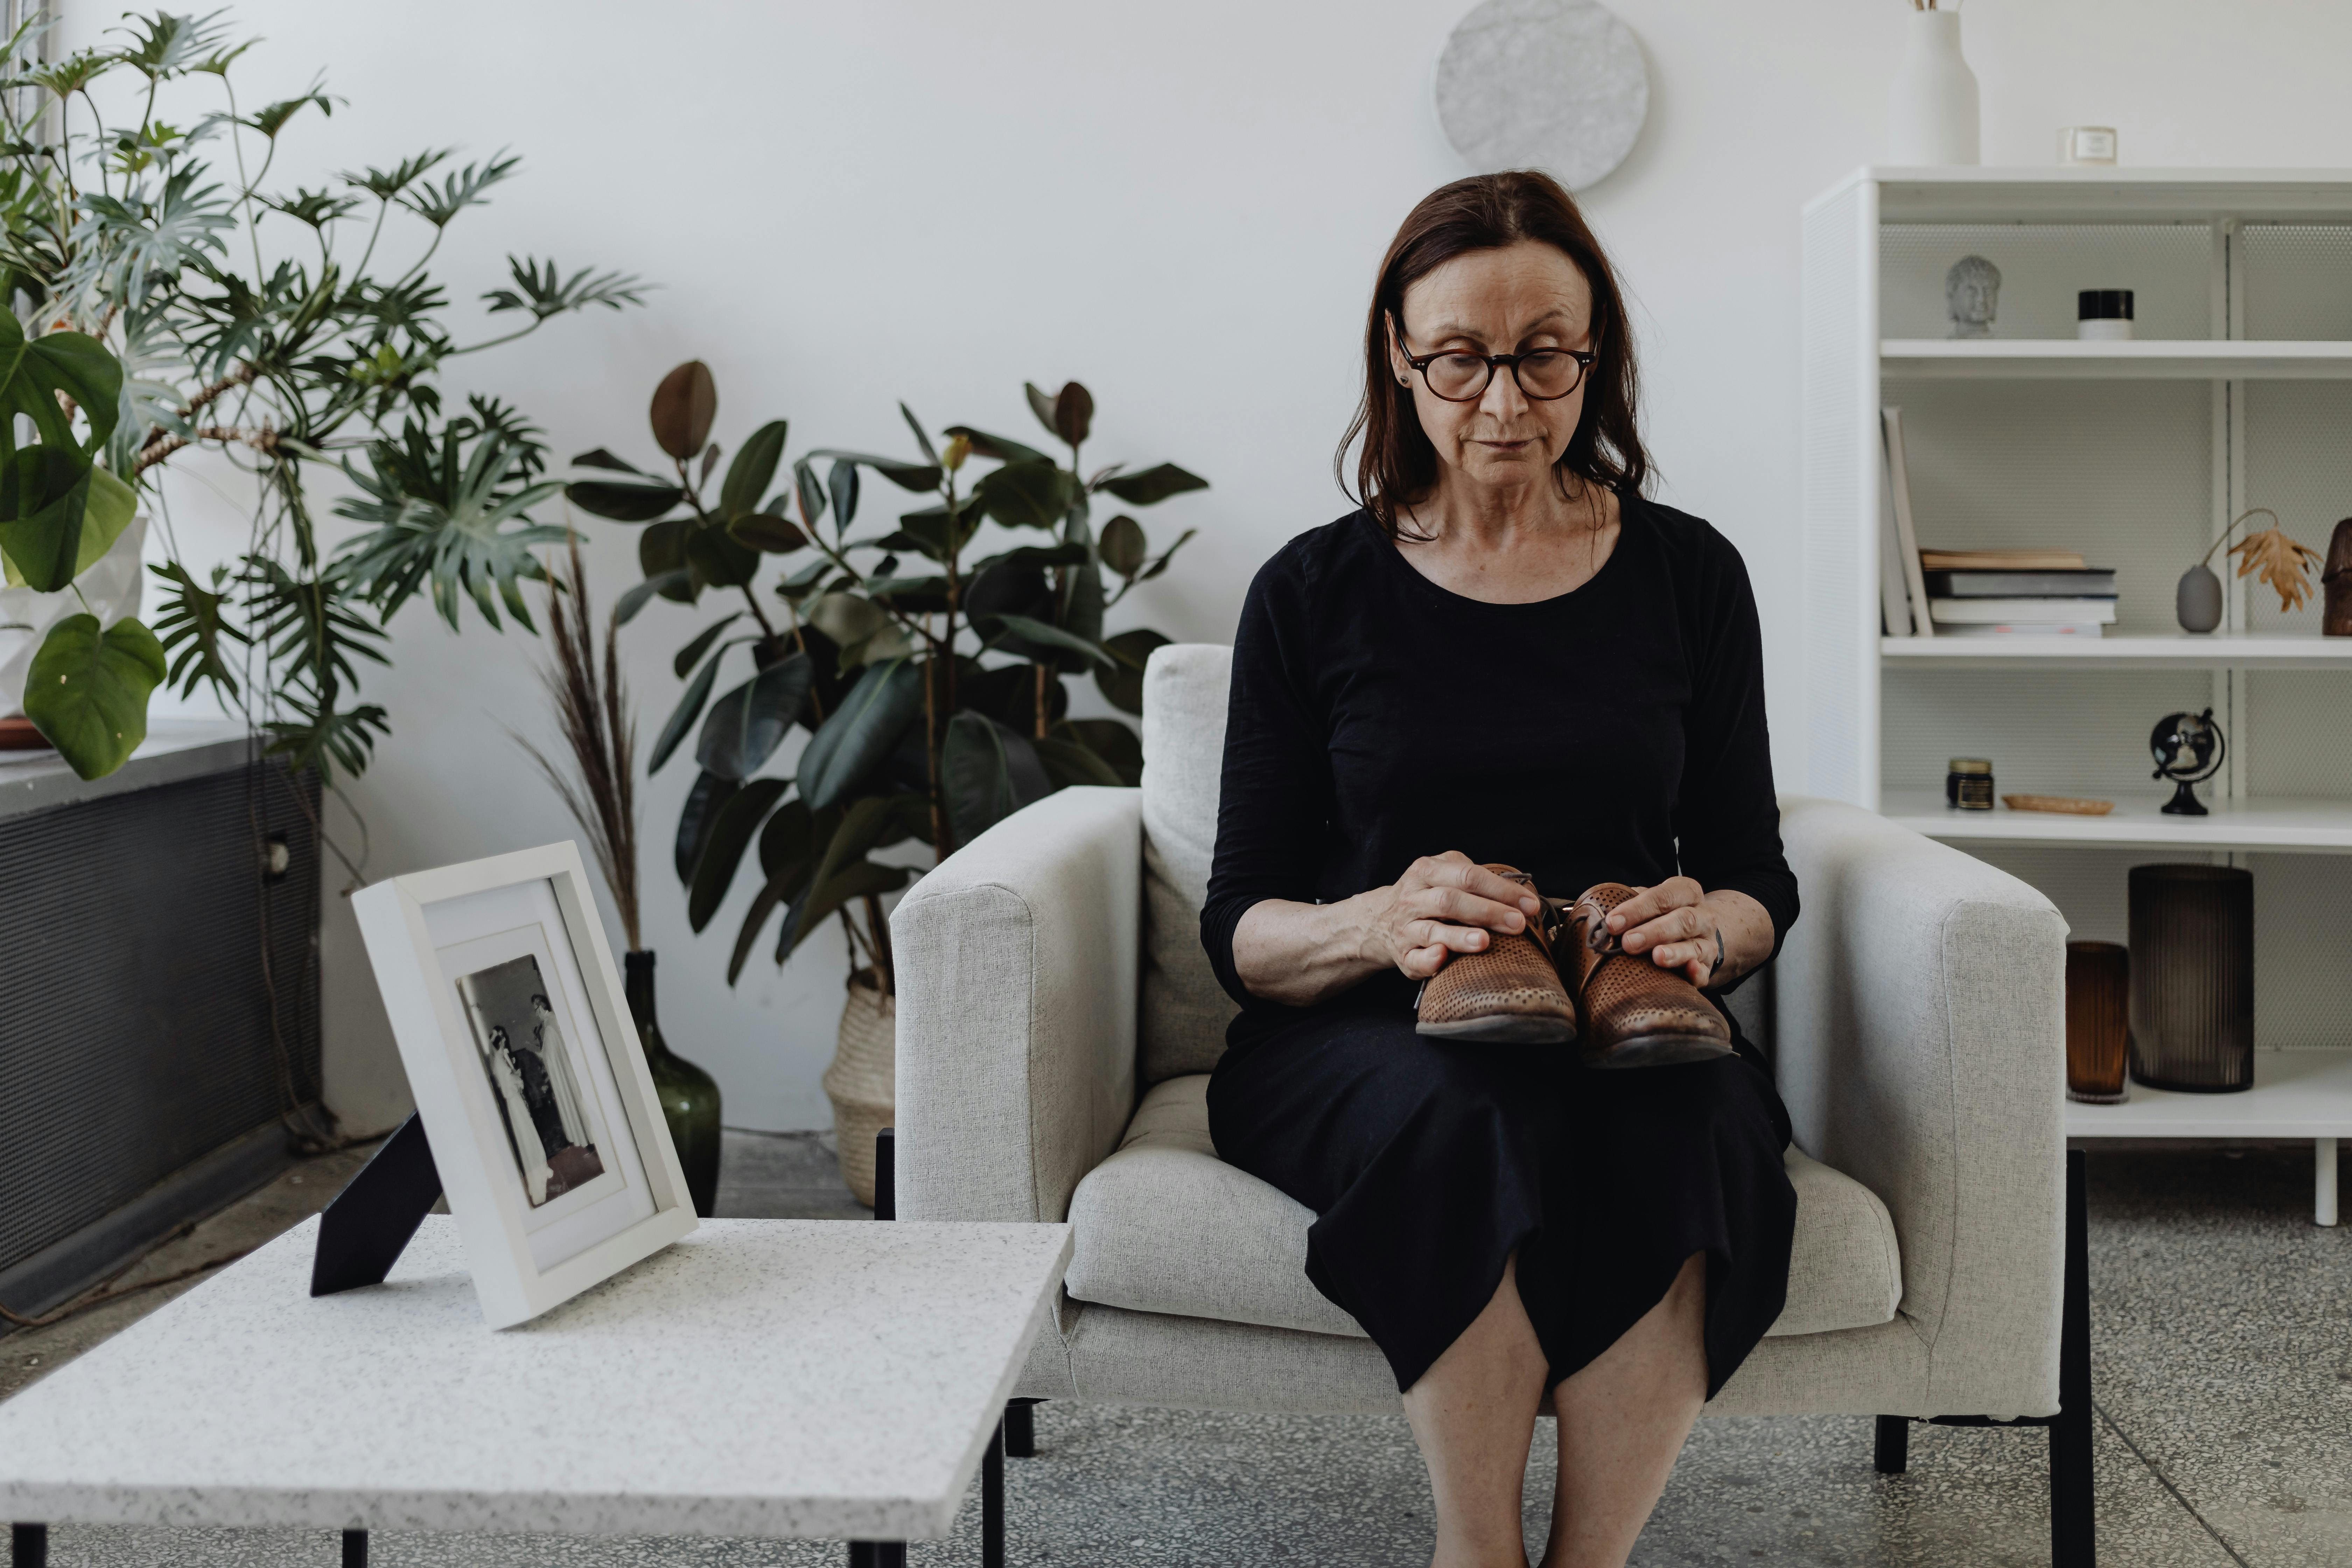 A sad woman in her living room | Source: Pexels